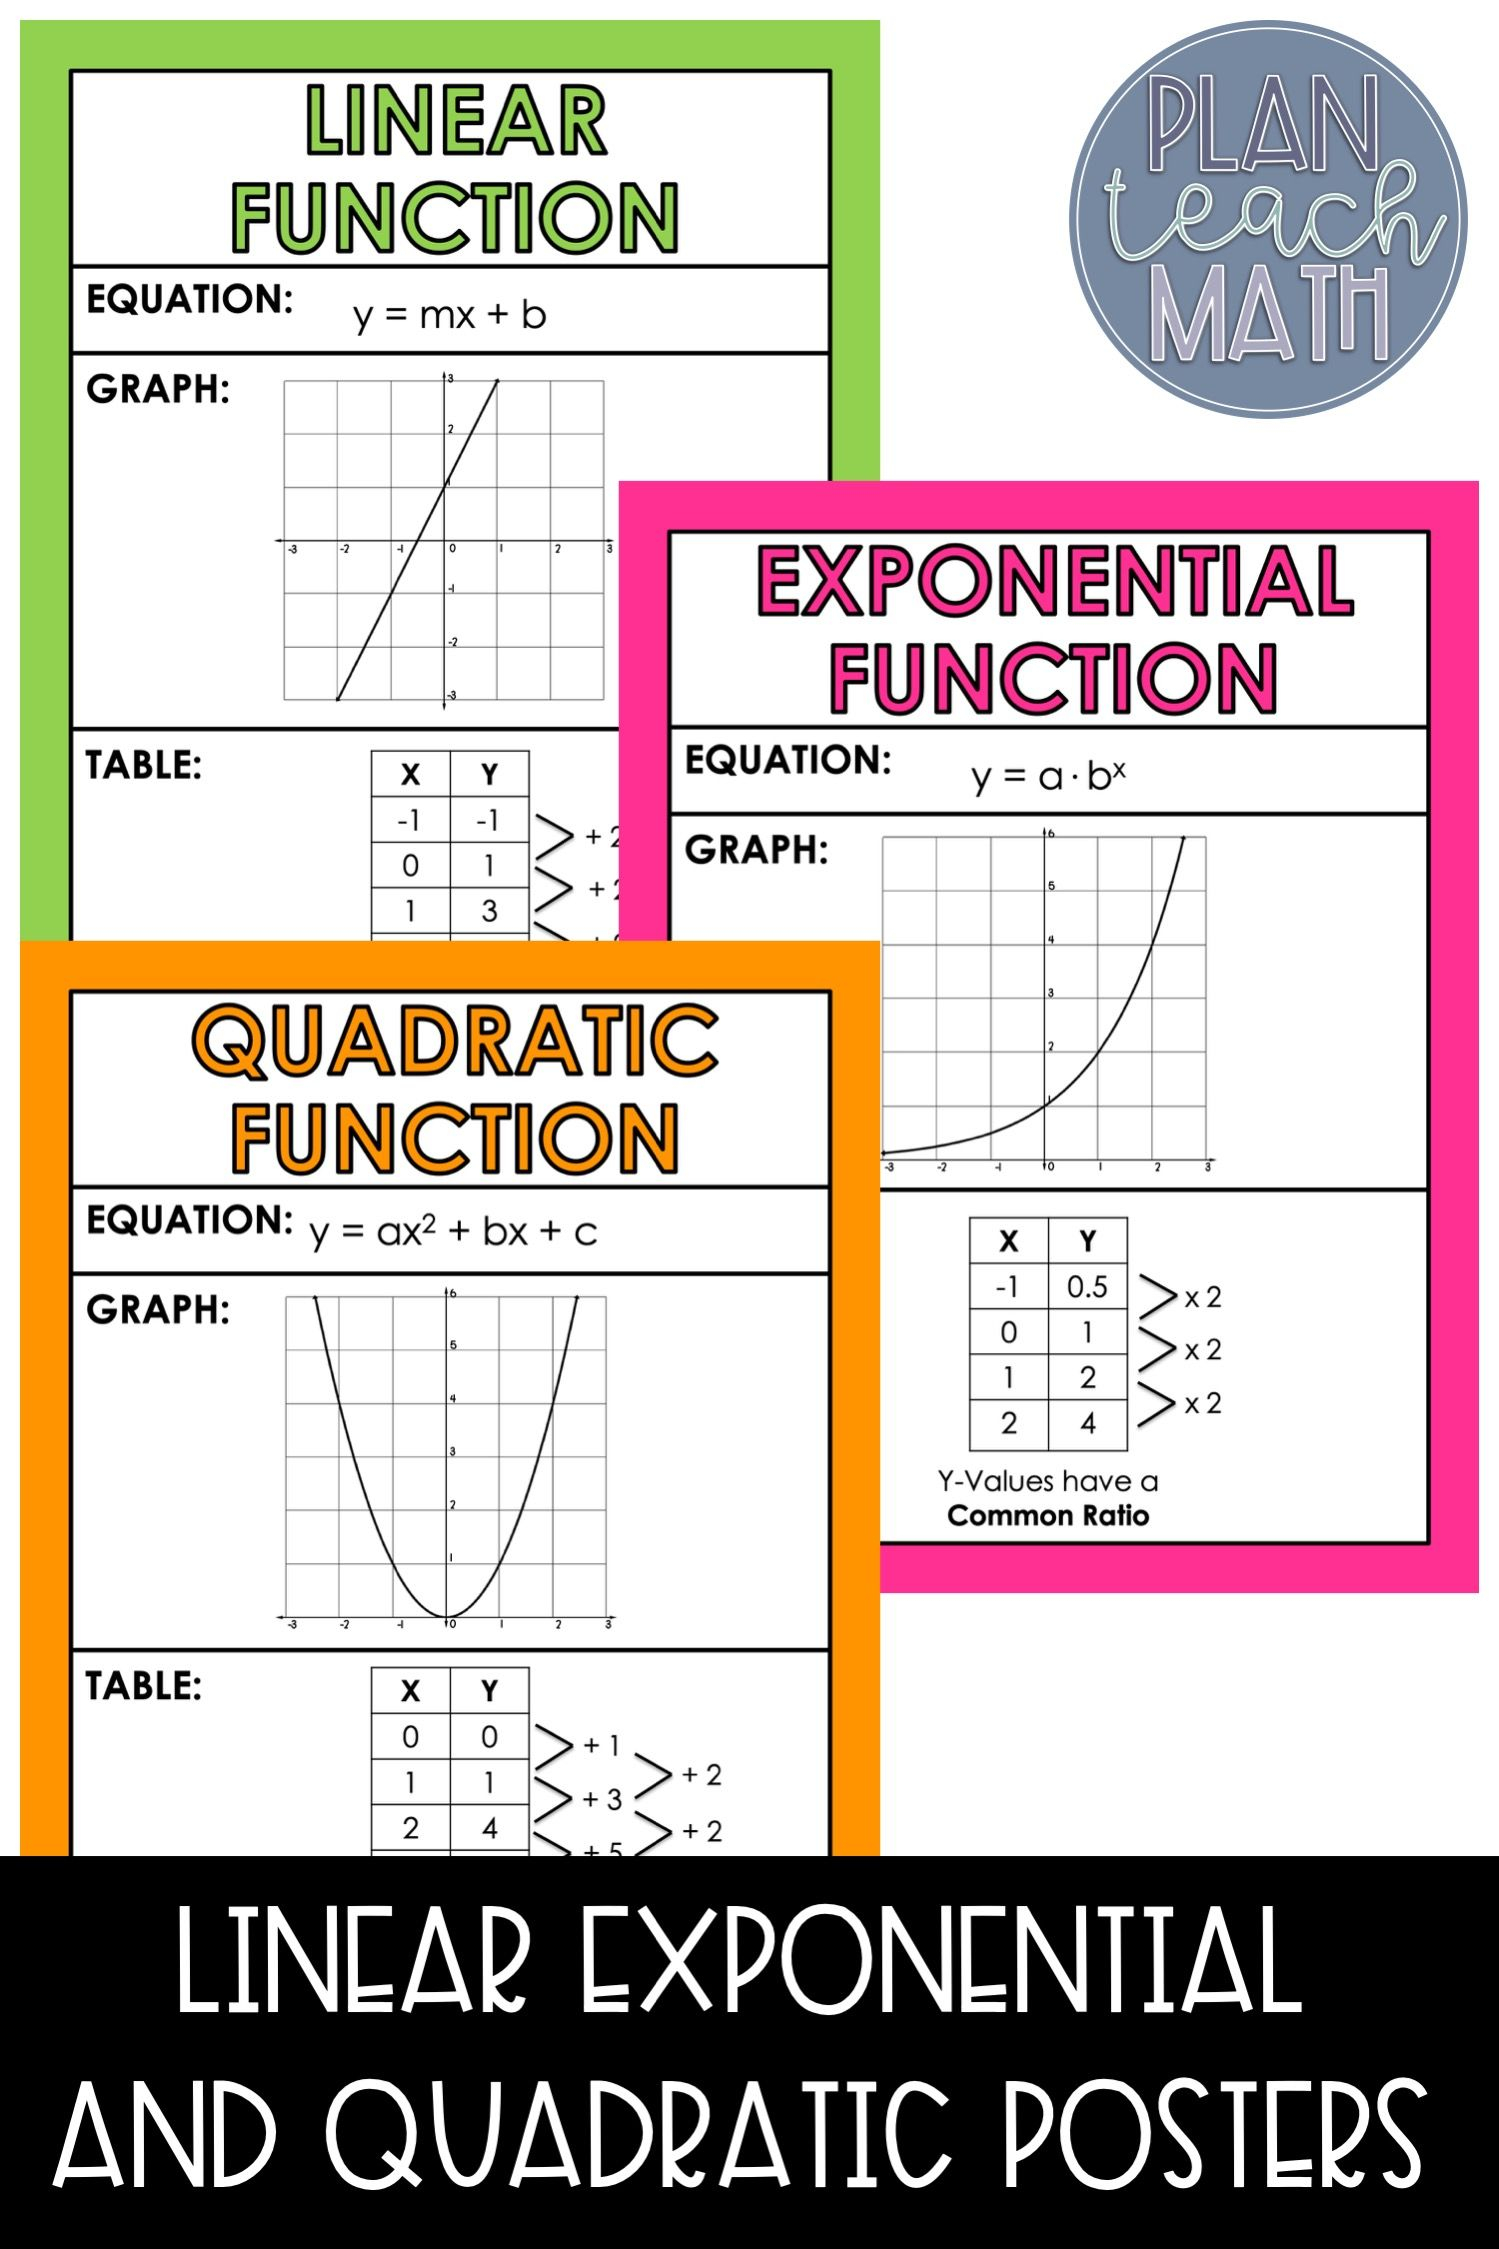 compare-linear-and-exponential-functions-worksheet-answers-function-worksheets